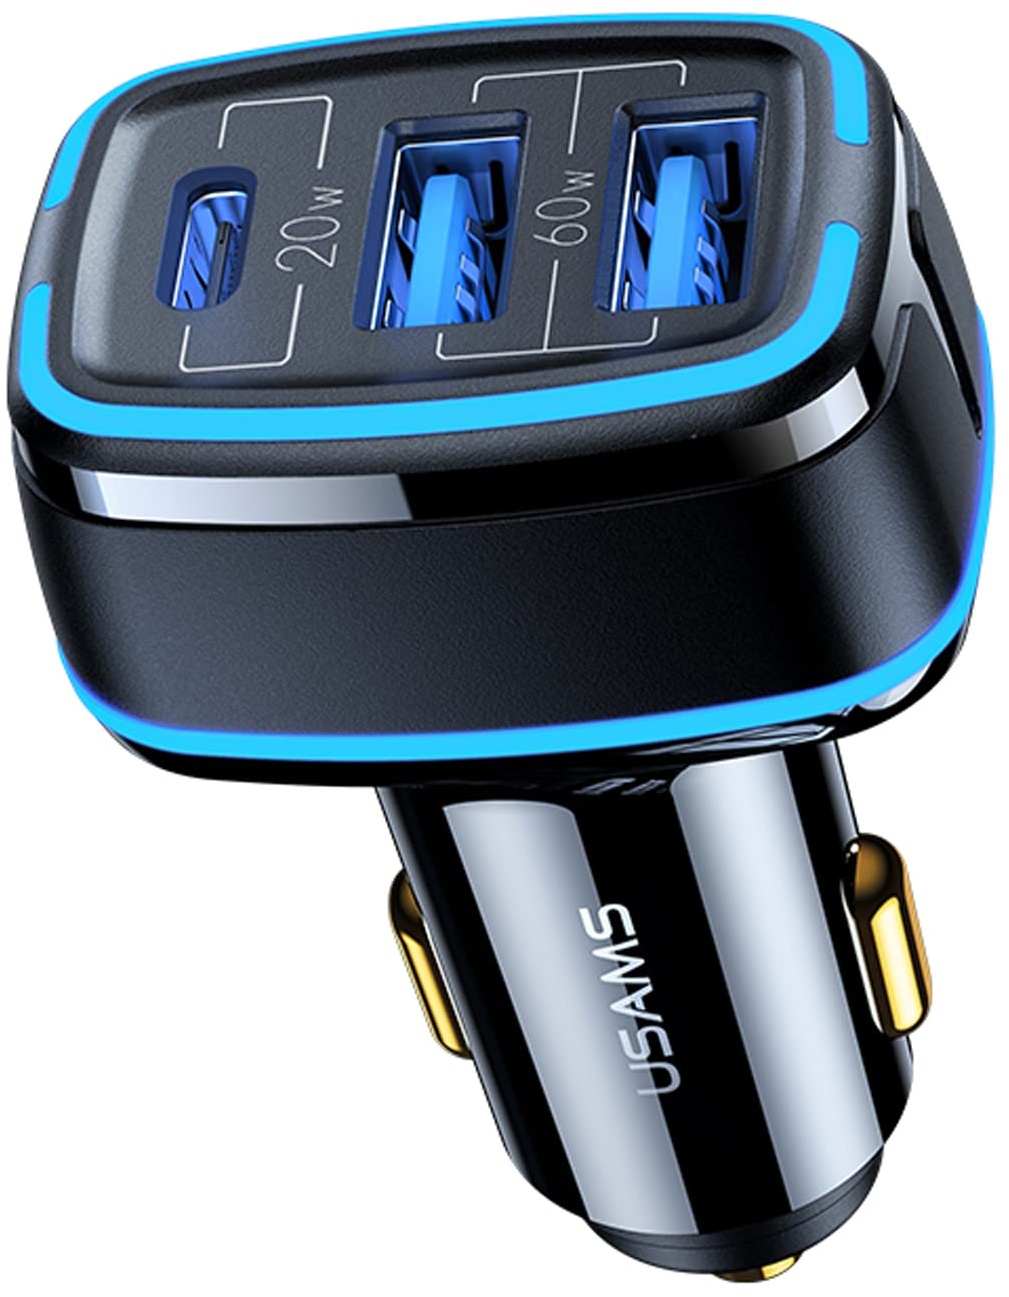 USAMS 3 Port USB Car Fast Charger 1 x TypeC 2 x USB Port -80W/4.5 A, 20W PD & 60W Dual QC3.0 - Car Charger Cigarette Lighter Adapter 12V - 80W Charging Power